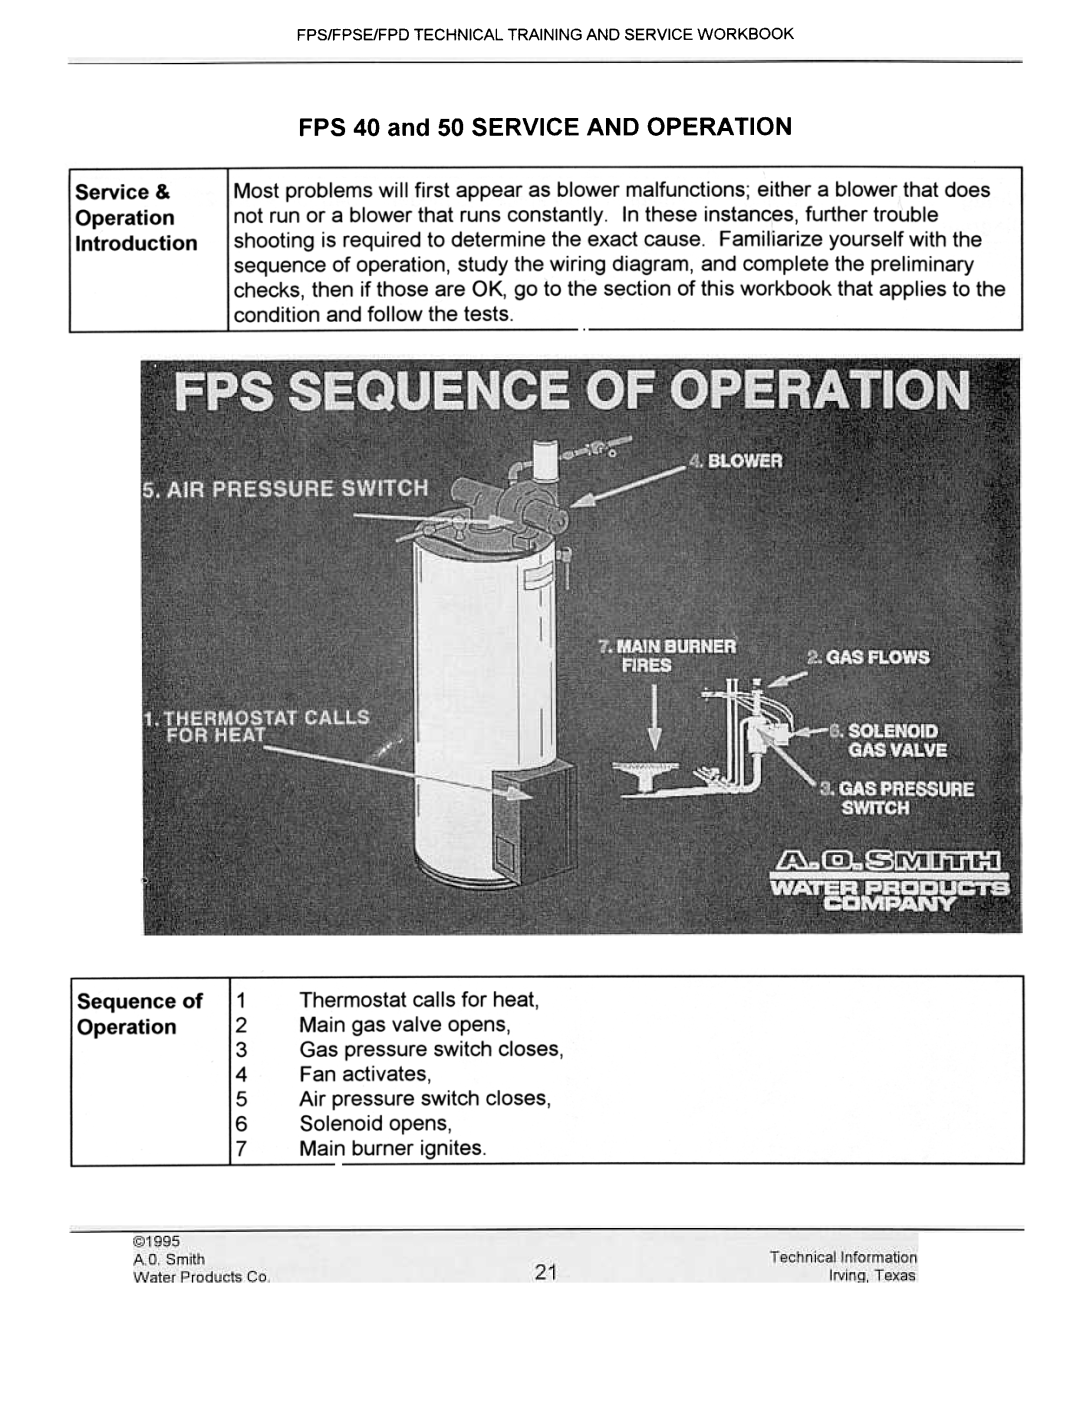 A.O. Smith FPS40, FPSE50, fps50 FPS 40 and 50 SERVICE AND OPERATION, Fps/Fpse/Fpd Technical Training And Service Workbook 